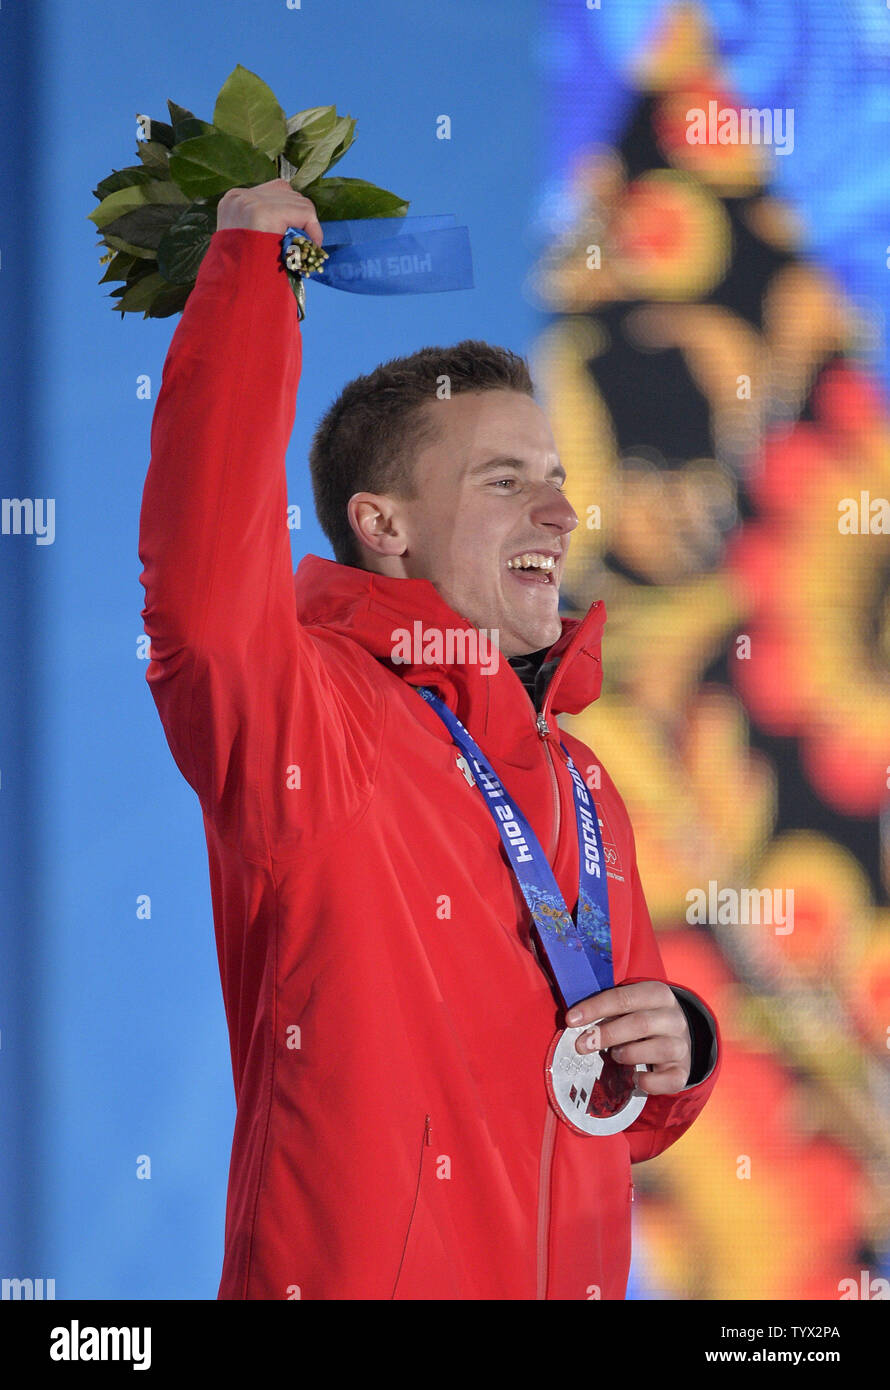 Switzerland's Nevin Galmarini celebrates his silver medal during the victory ceremony for men's snowboard parallel giant slalom at the Sochi 2014 Winter Olympics on February 19, 2014 in Sochi, Russia.     UPI/Brian Kersey Stock Photo